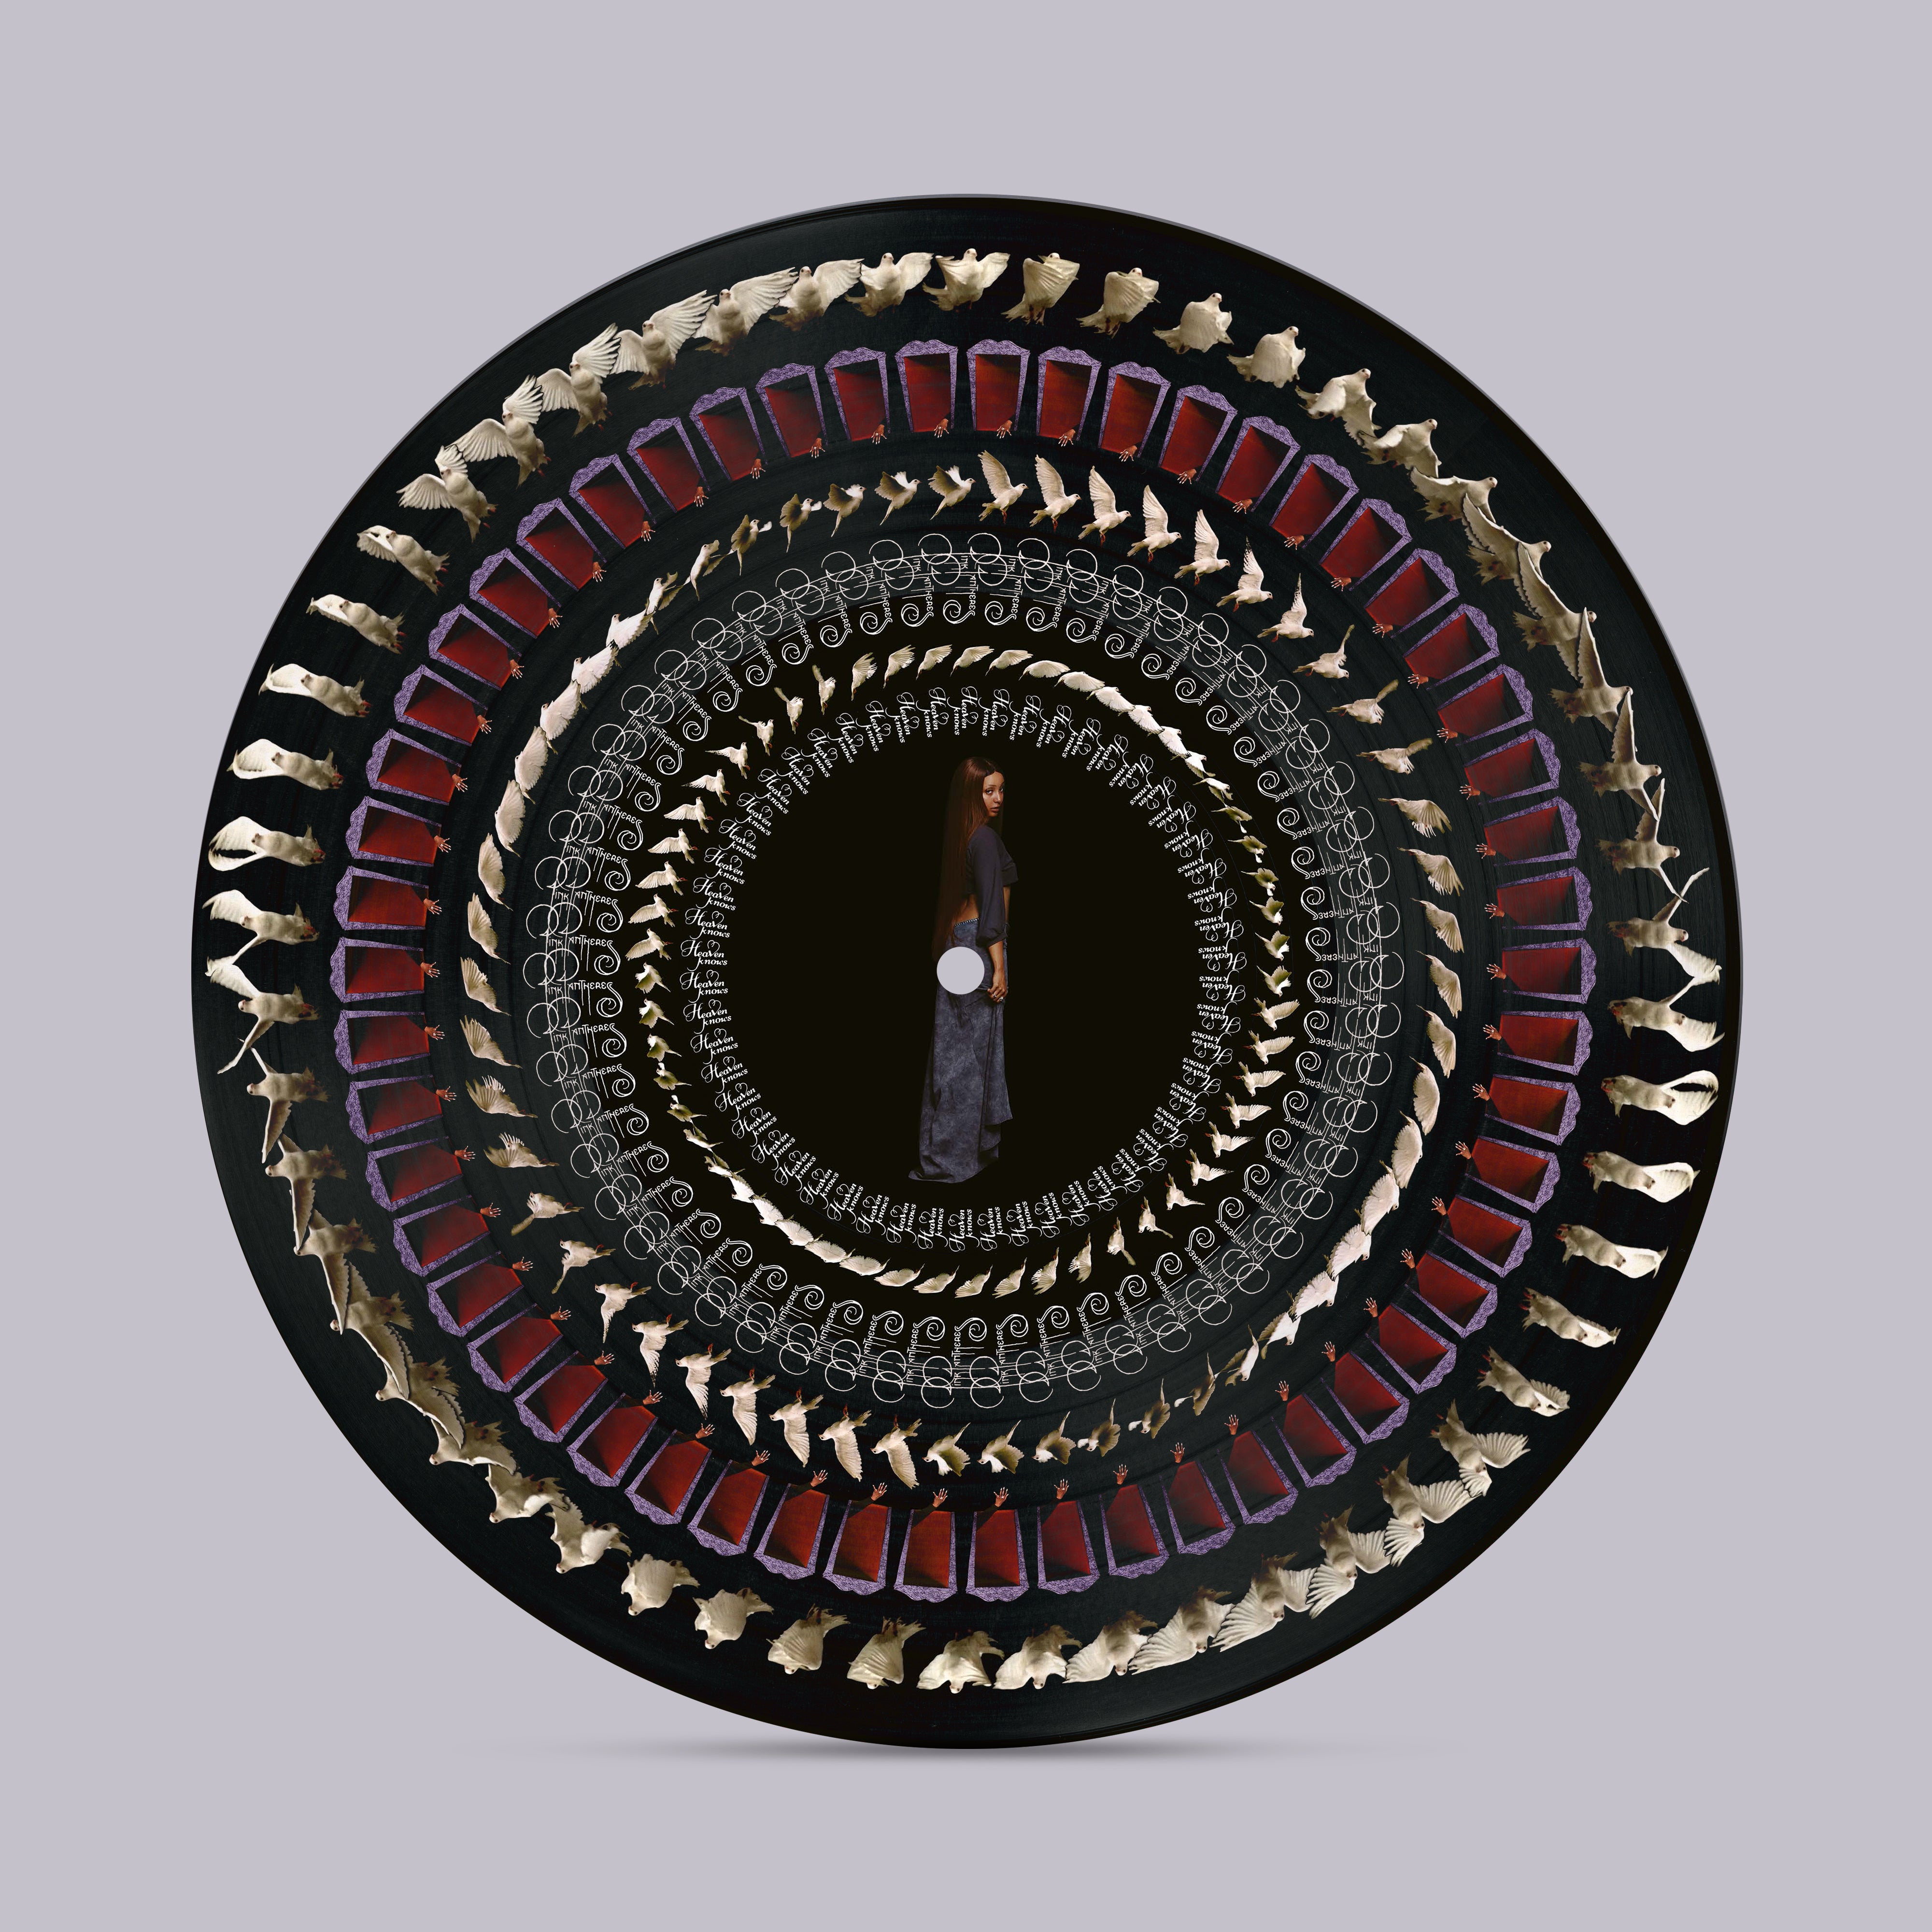 PinkPantheress - Heaven knows: Limited Zoetrope Picture Disc Vinyl LP